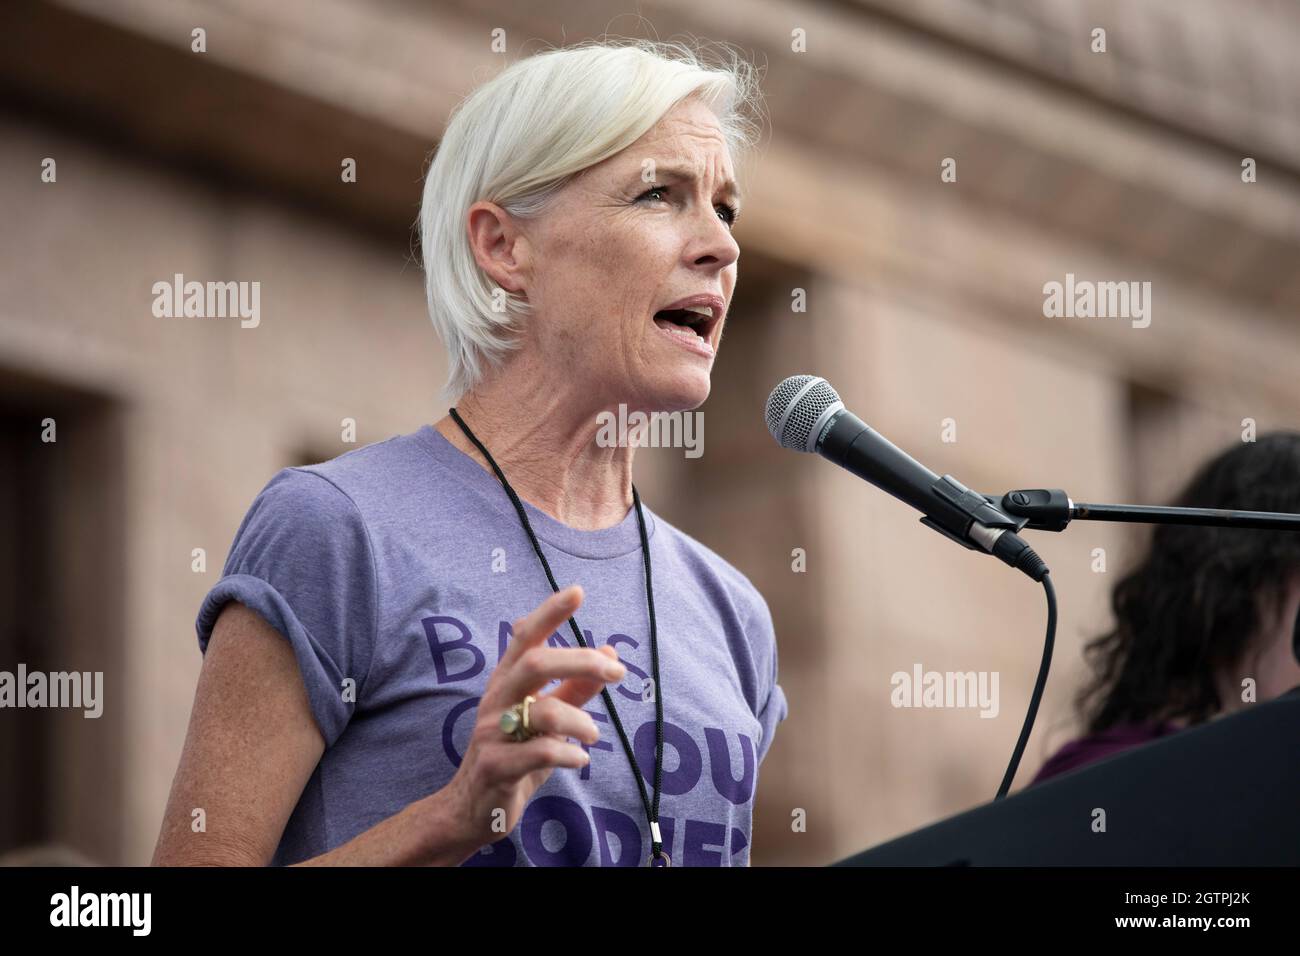 Austin Texas USA, Oct. 2 2021: Former director of Planned parenthood, CECILE RICHARDS, wraps up the rally as several thousand Texas women rally at the Capitol south steps to protest recent Texas laws passed restricting women's right to abortion. A restrictive Texas abortion law makes it a crime to have an abortion after six weeks in most cases. Credit: Bob Daemmrich/Alamy Live News Stock Photo